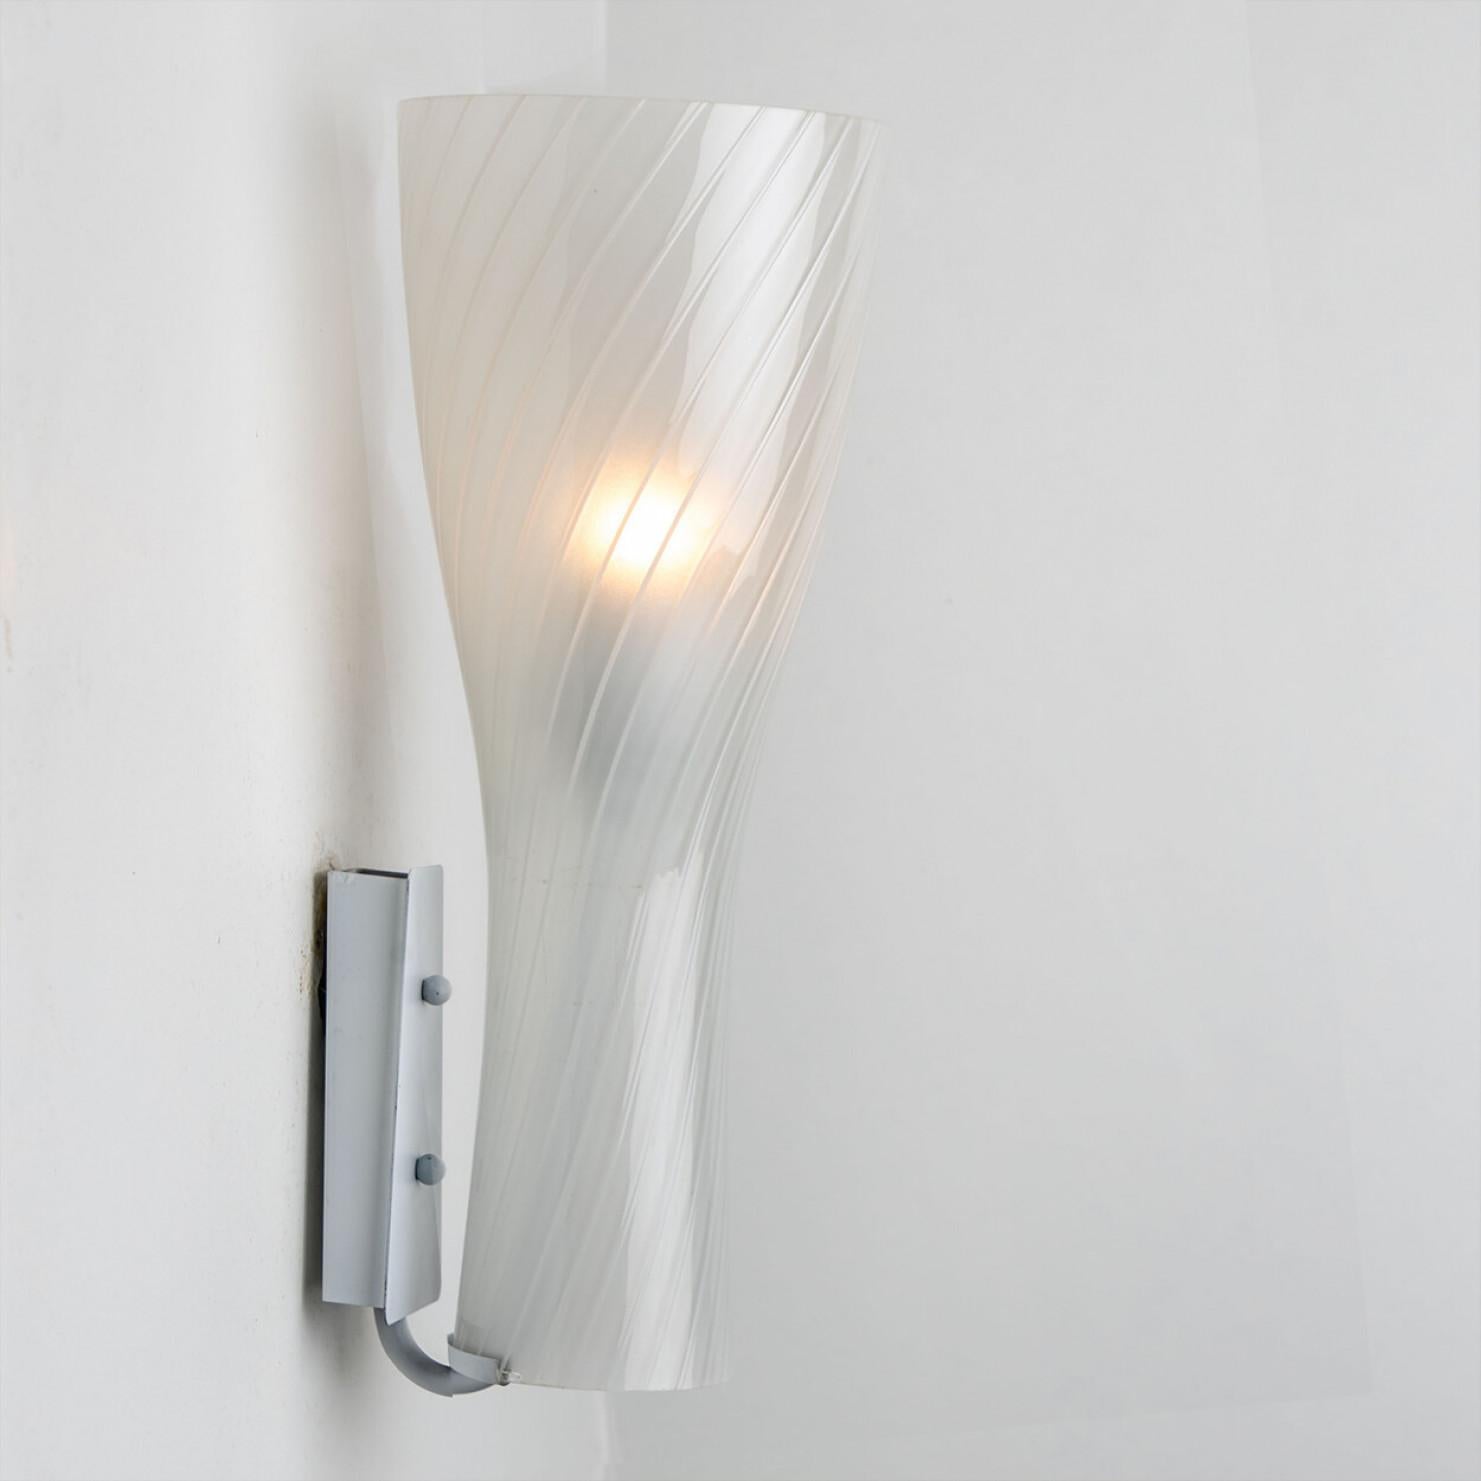 1 of 6 Striped Clear White Glass Wall Lights by Gangkofner for Peill, Germany For Sale 7